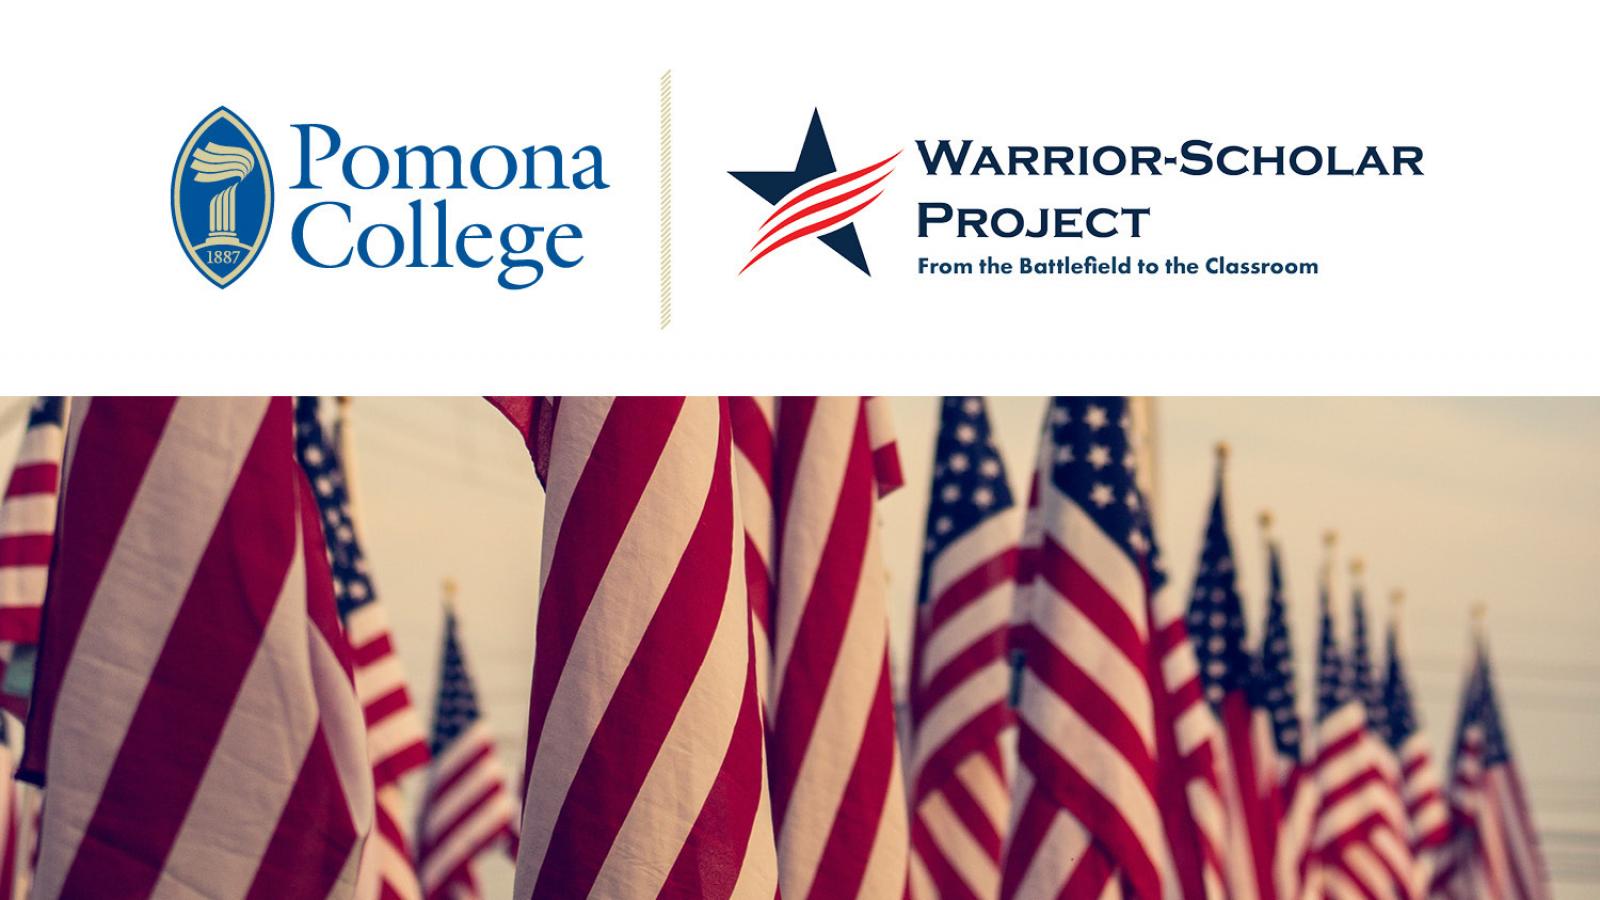 Pomona College and Warrior-Scholar Project logos and row of U.S. flags